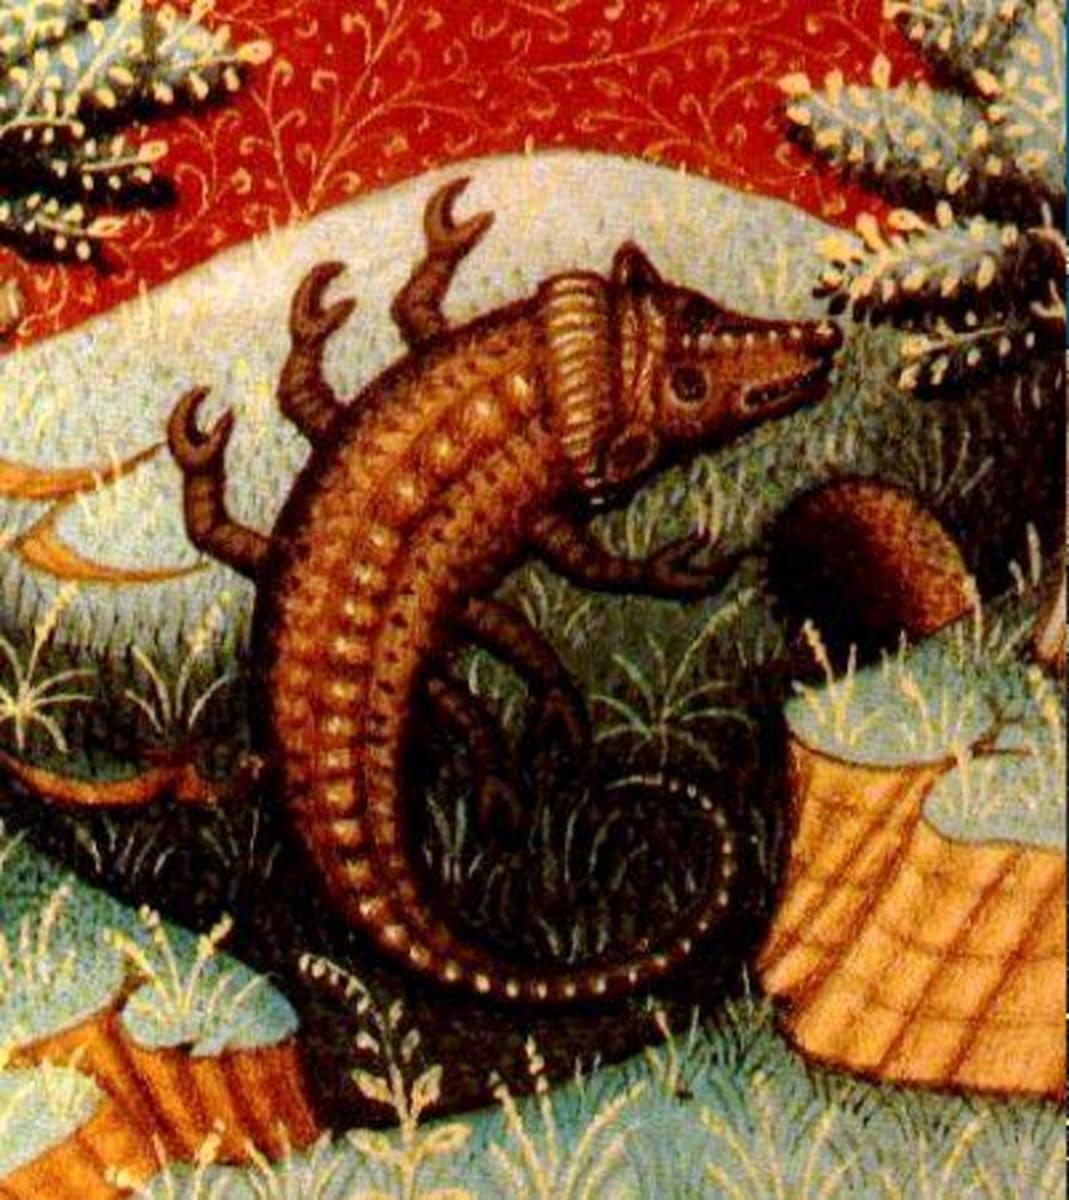 Here is an unusual image representing the Scorpio sun sign.  I think it looks more like a lizard, another Scorpio symbol.